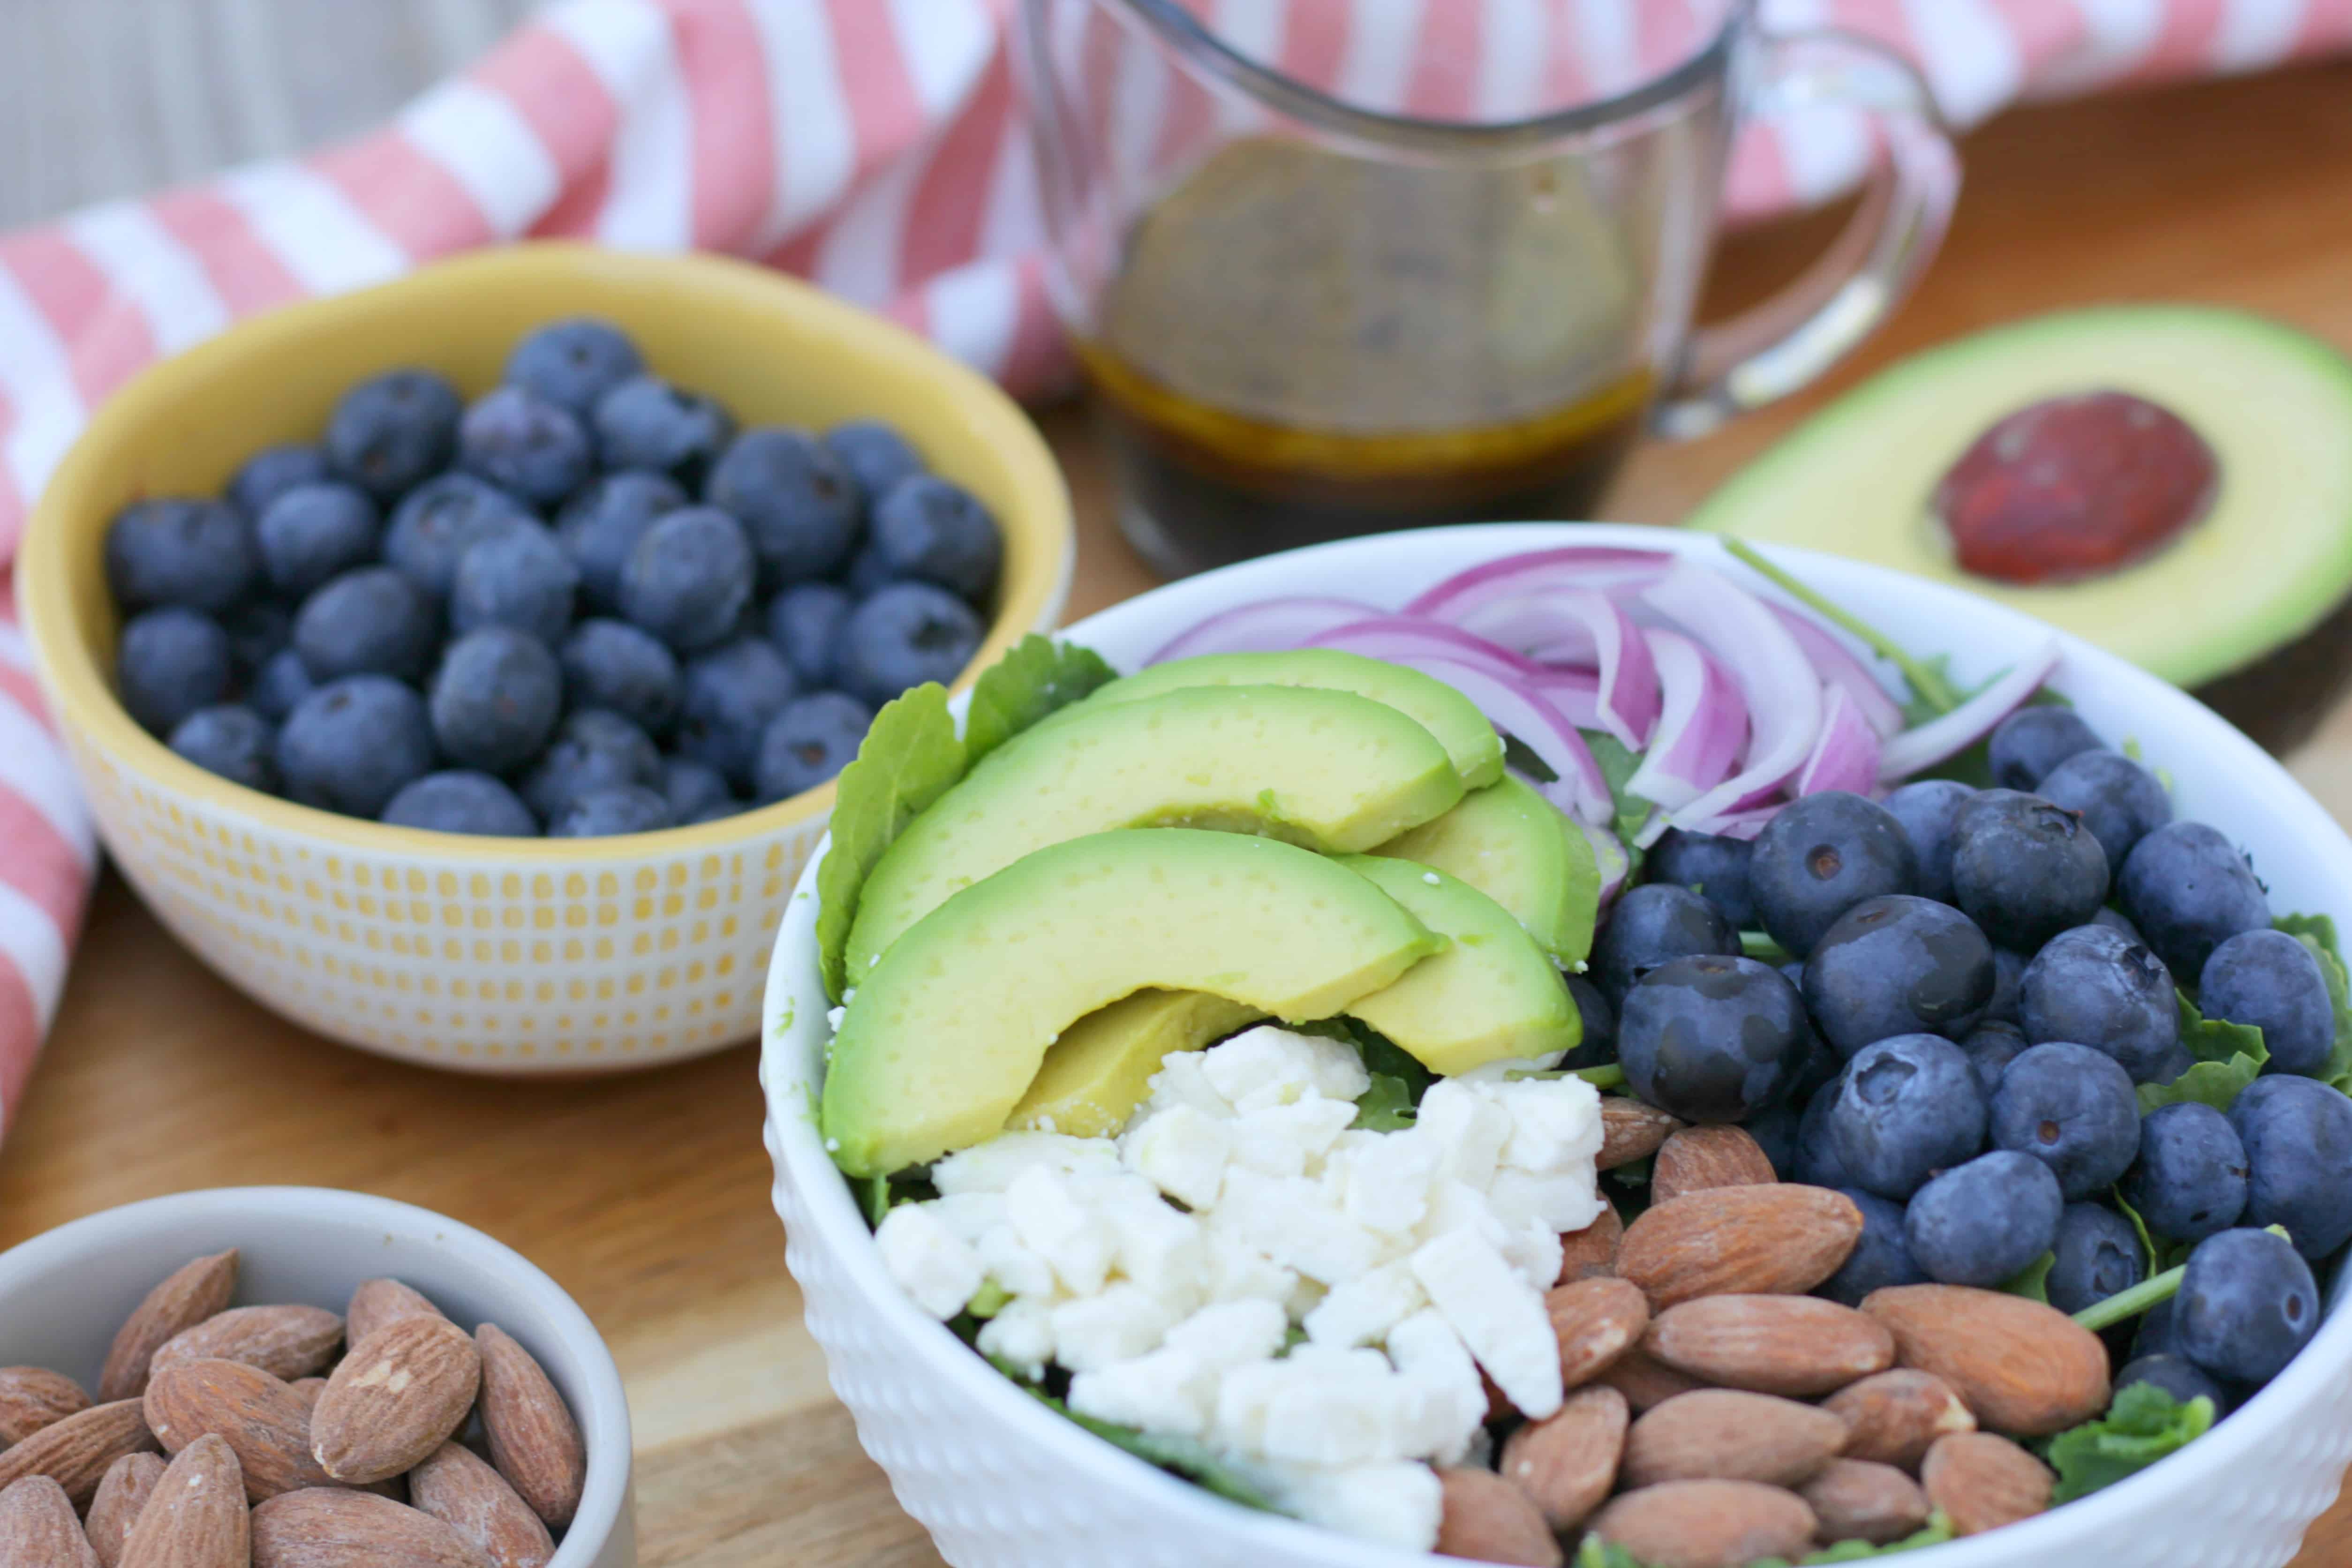 A blueberry salad with avocado and feta cheese